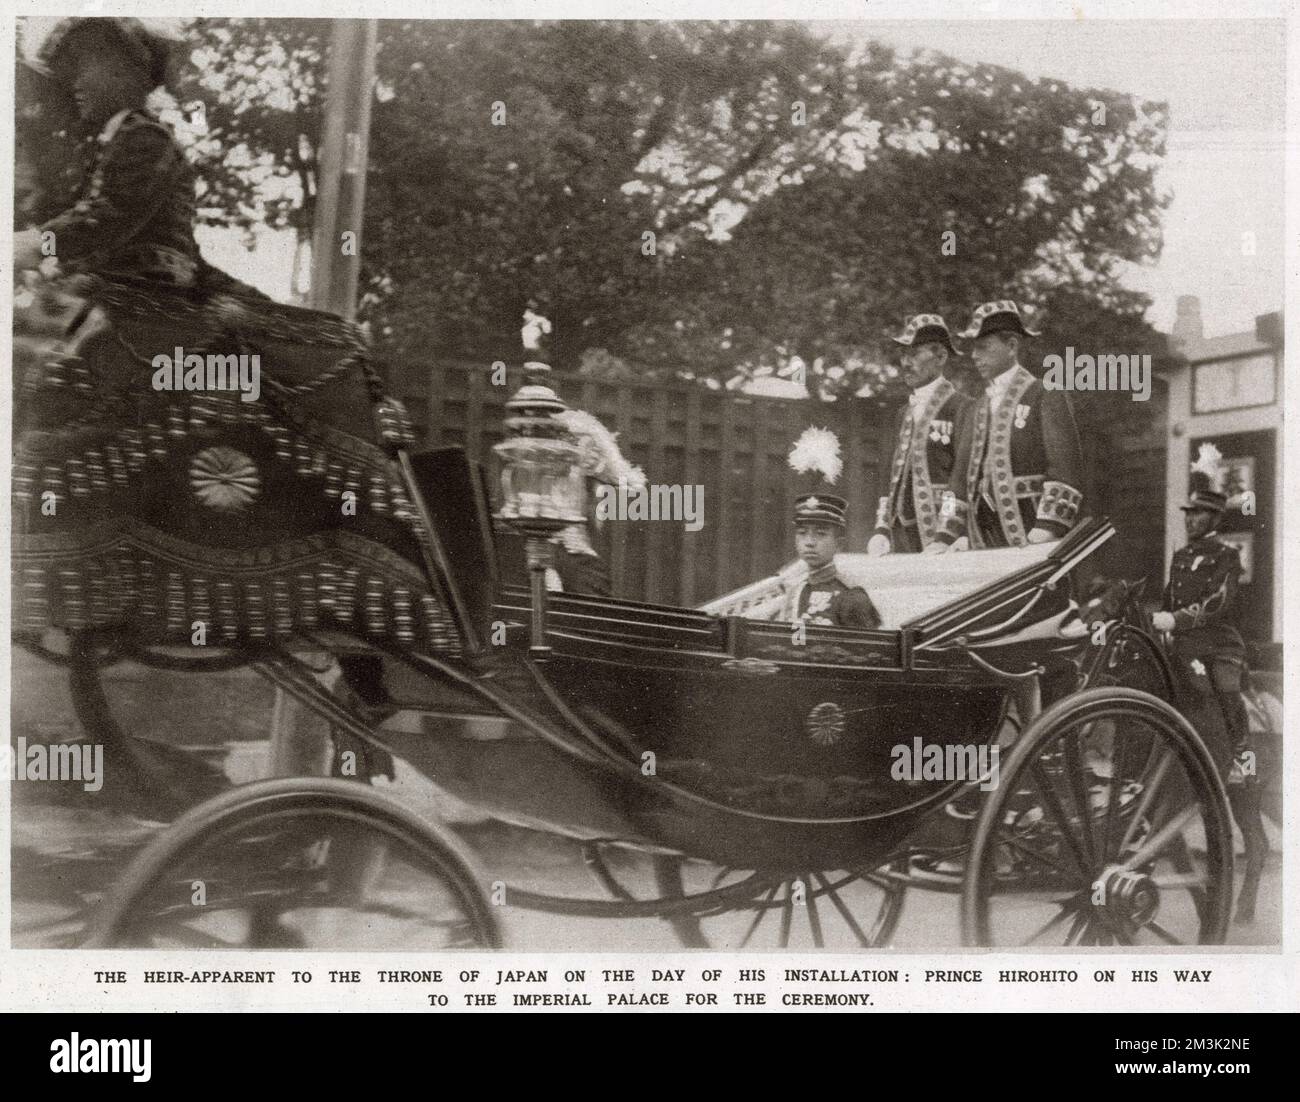 Prince Hirohito (1901 - 1989), in his carriage on the way to be formally installed as Heir to the Throne, 3rd November 1916. The eldest son of Emperor Taisho, he became the 124th Emperor of Japan, in 1926, on the death of his father. Stock Photo